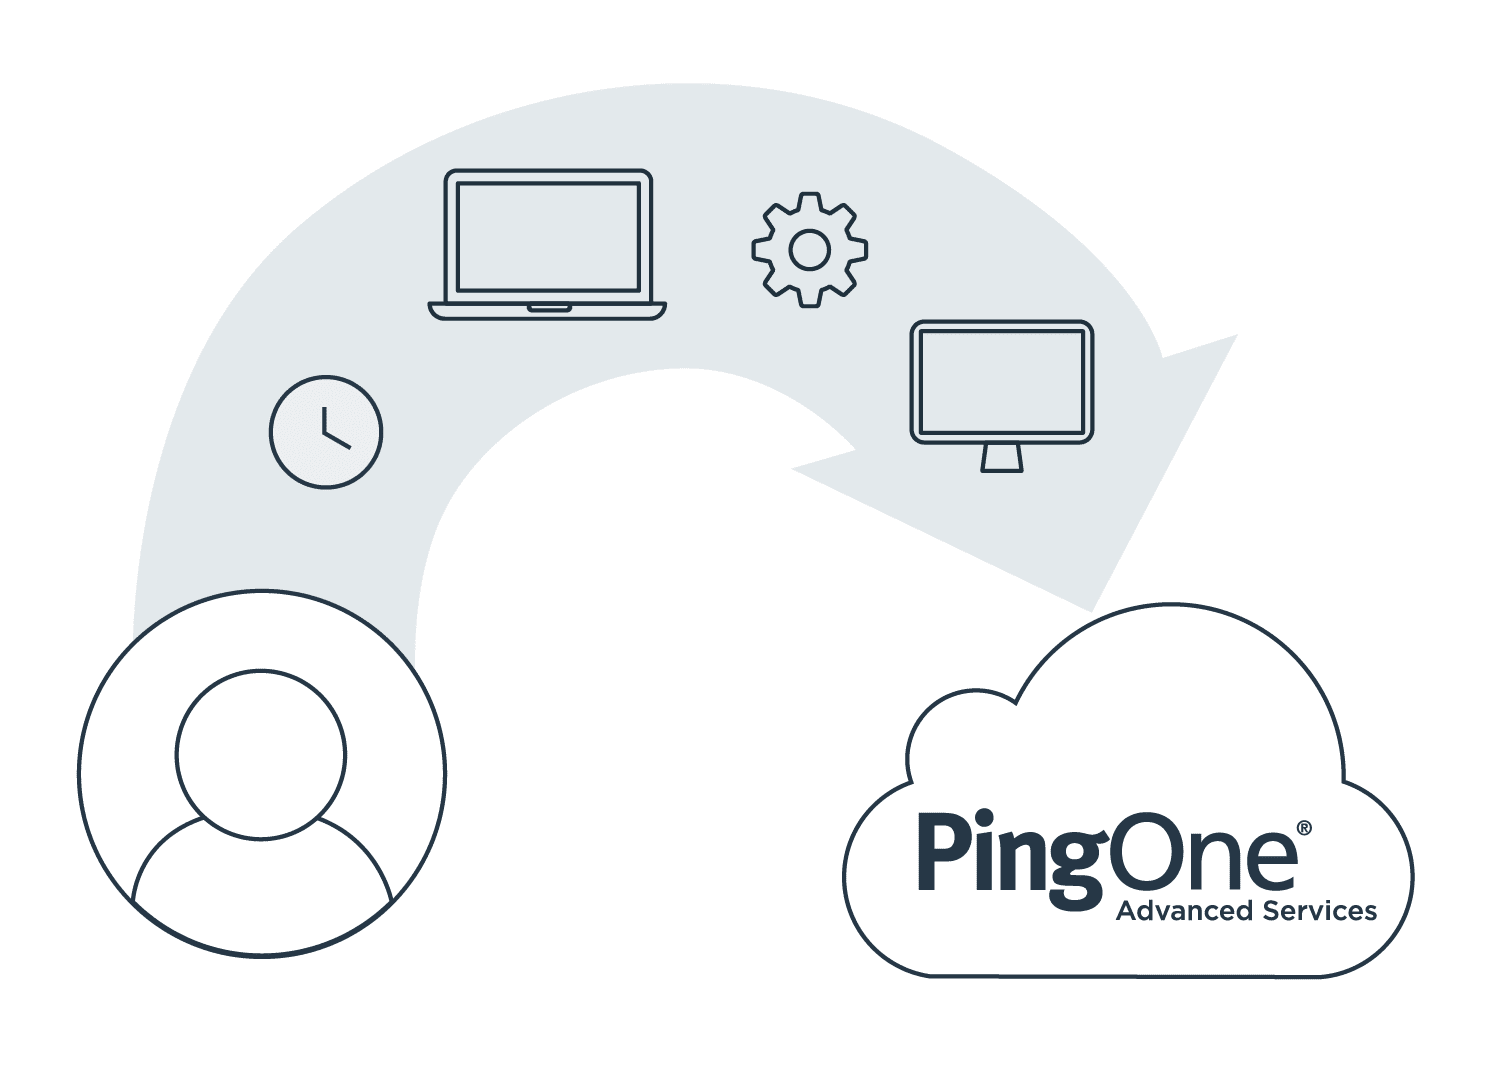 PingOne Advanced Services